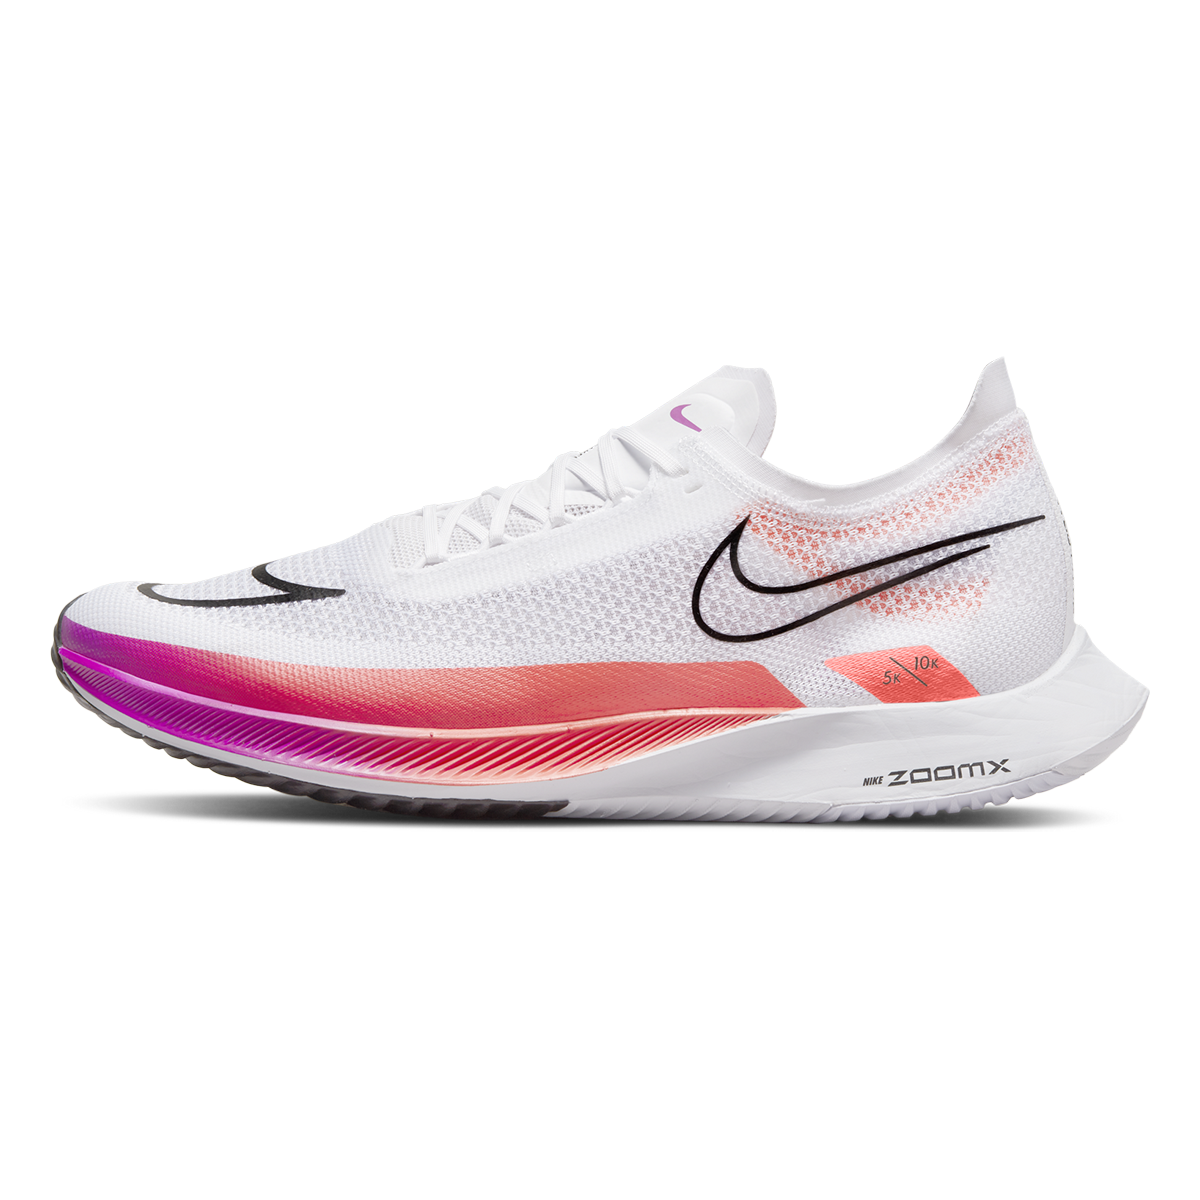 Nike ZoomX Streakfly, , large image number null